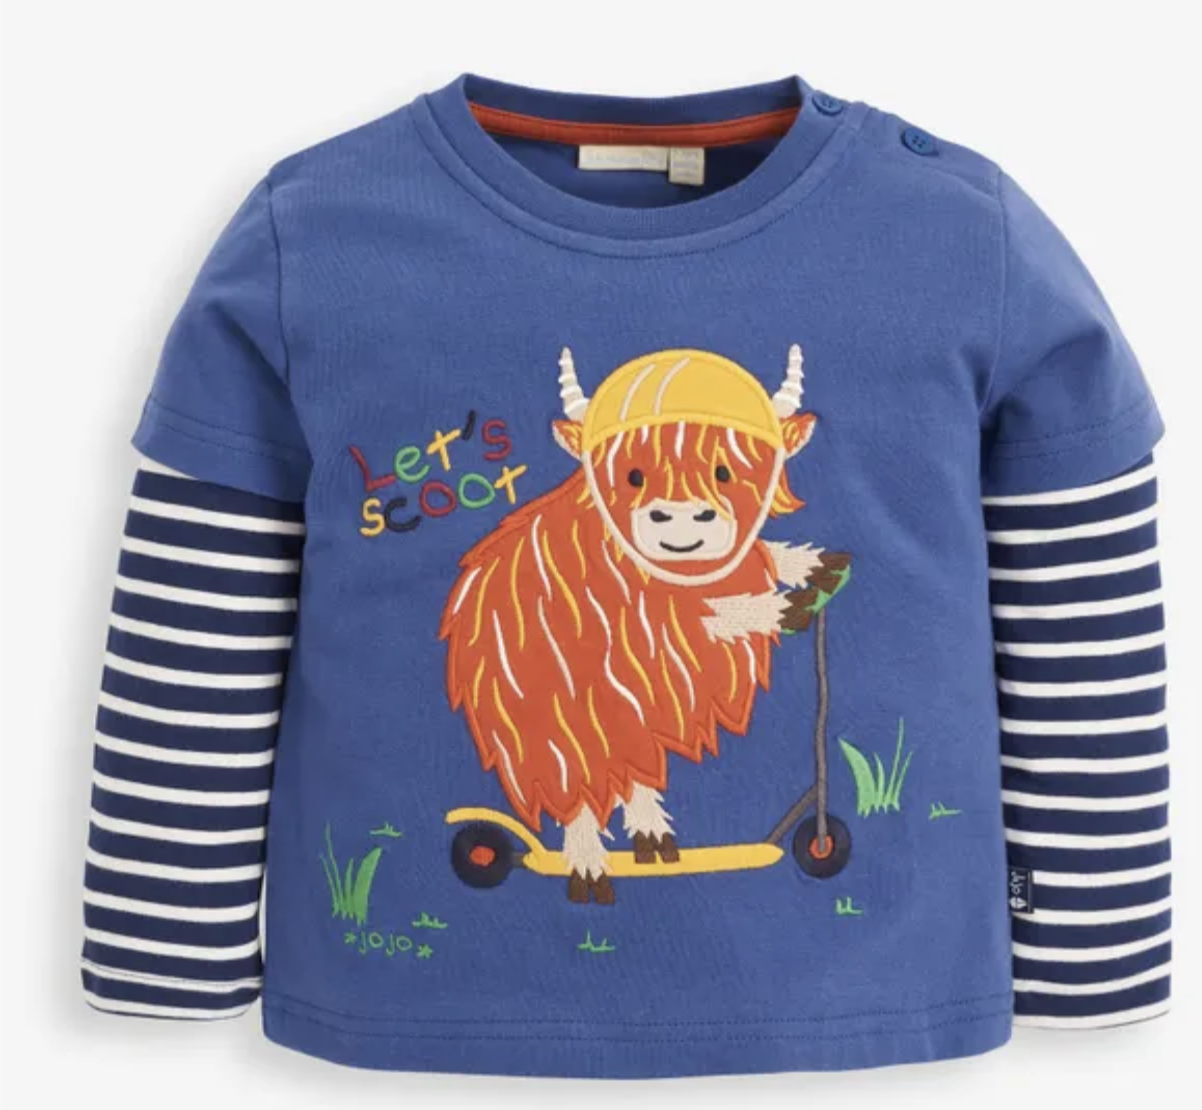 Scooting Highland Cow Applique Top IND23